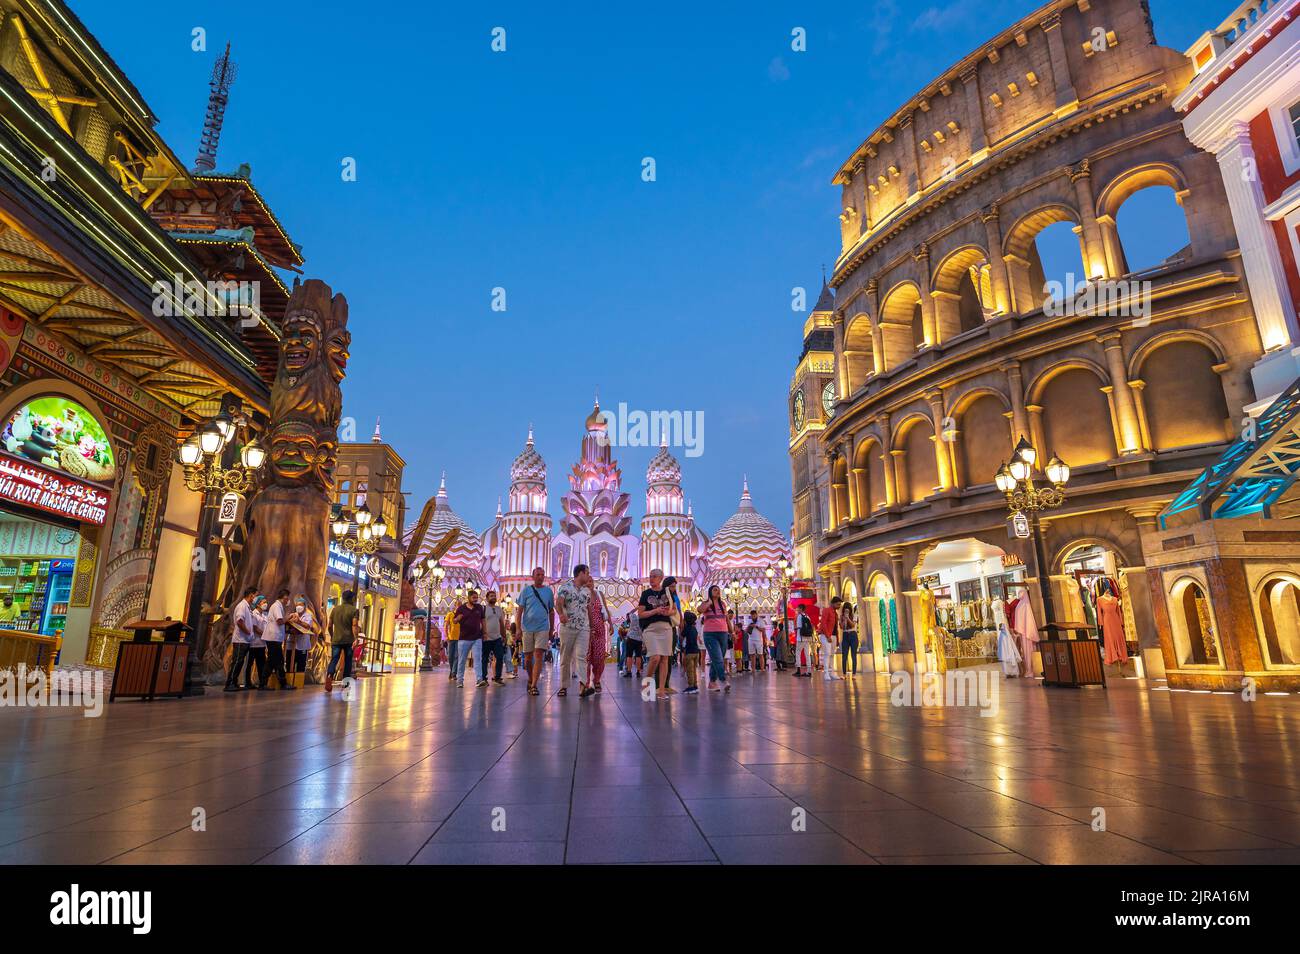 Dubai, United Arab Emirates - April 4, 2022: Crowded Global village in Dubai at sunset. Popular tourist attraction with shops and restaurants from aro Stock Photo